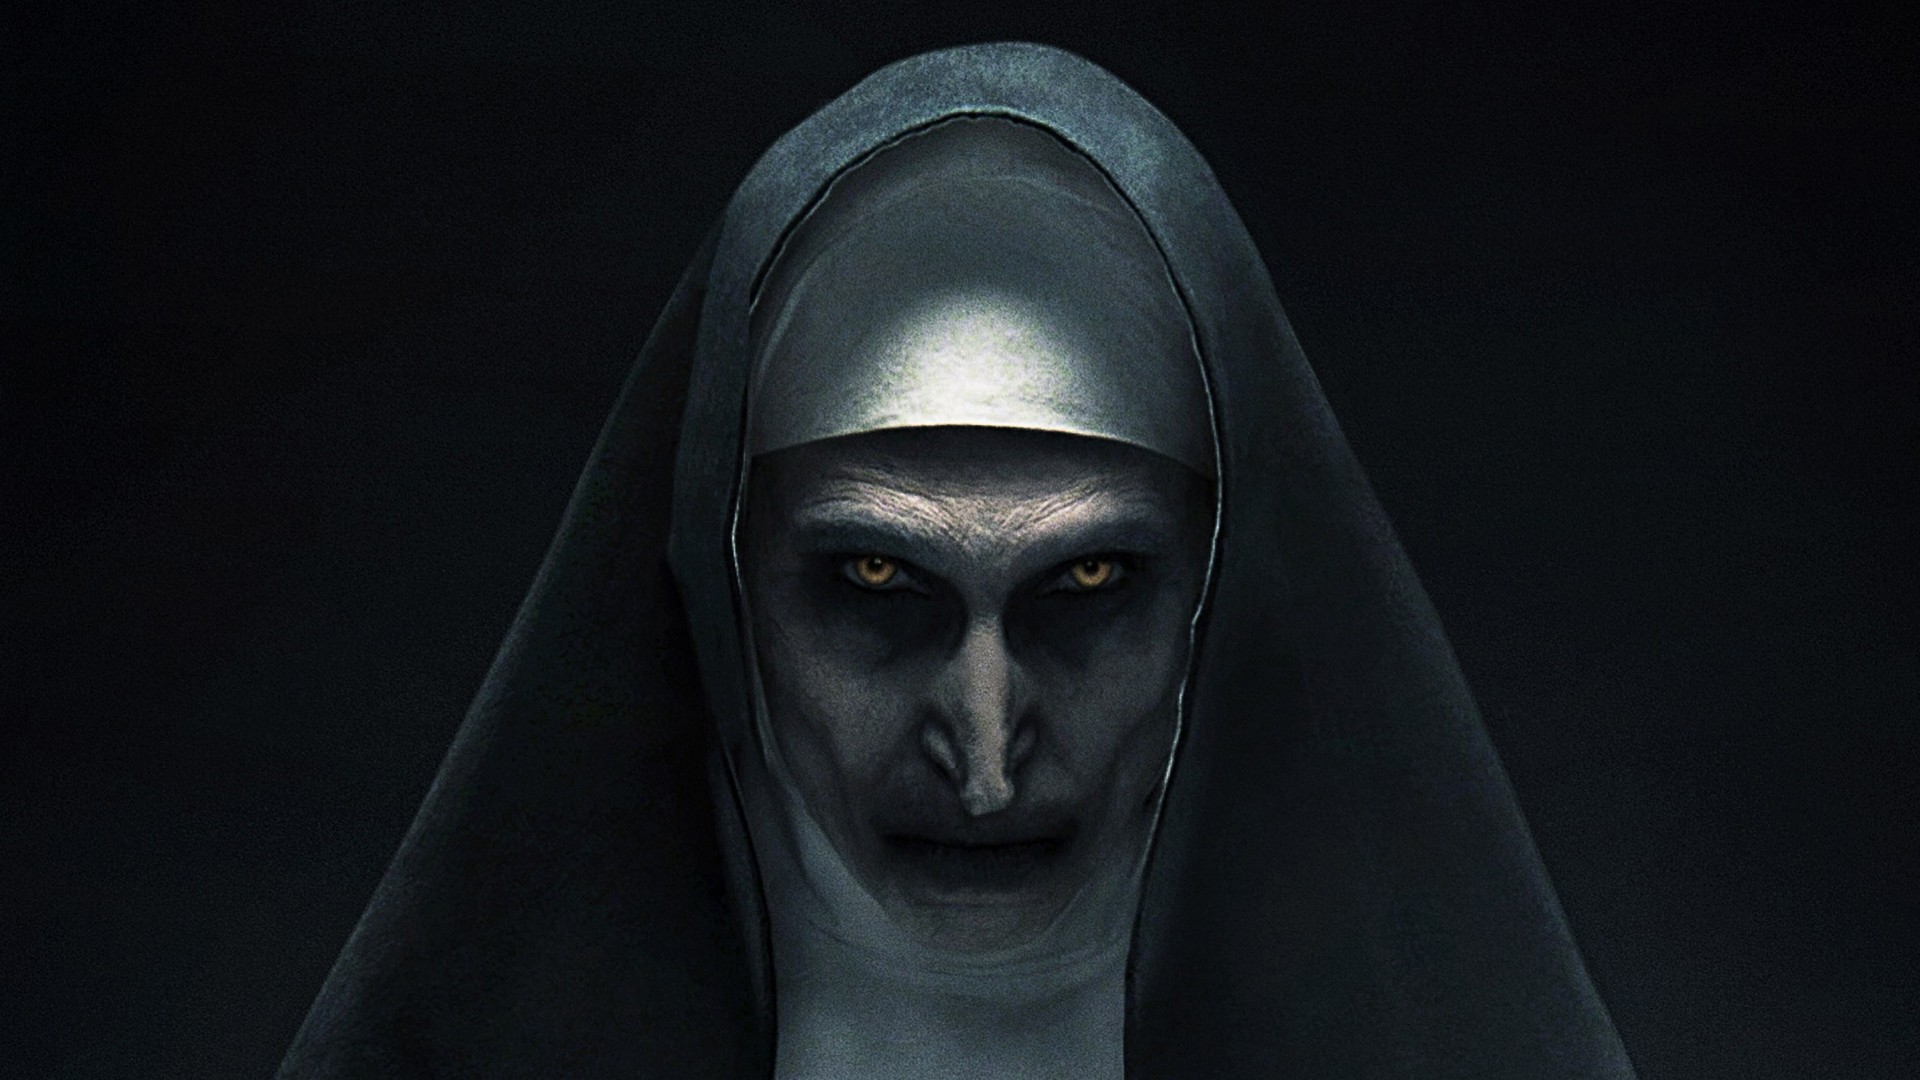 Wallpaper The Nun HD with image resolution 1920x1080 pixel. You can make this wallpaper for your Desktop Computer Backgrounds, Mac Wallpapers, Android Lock screen or iPhone Screensavers